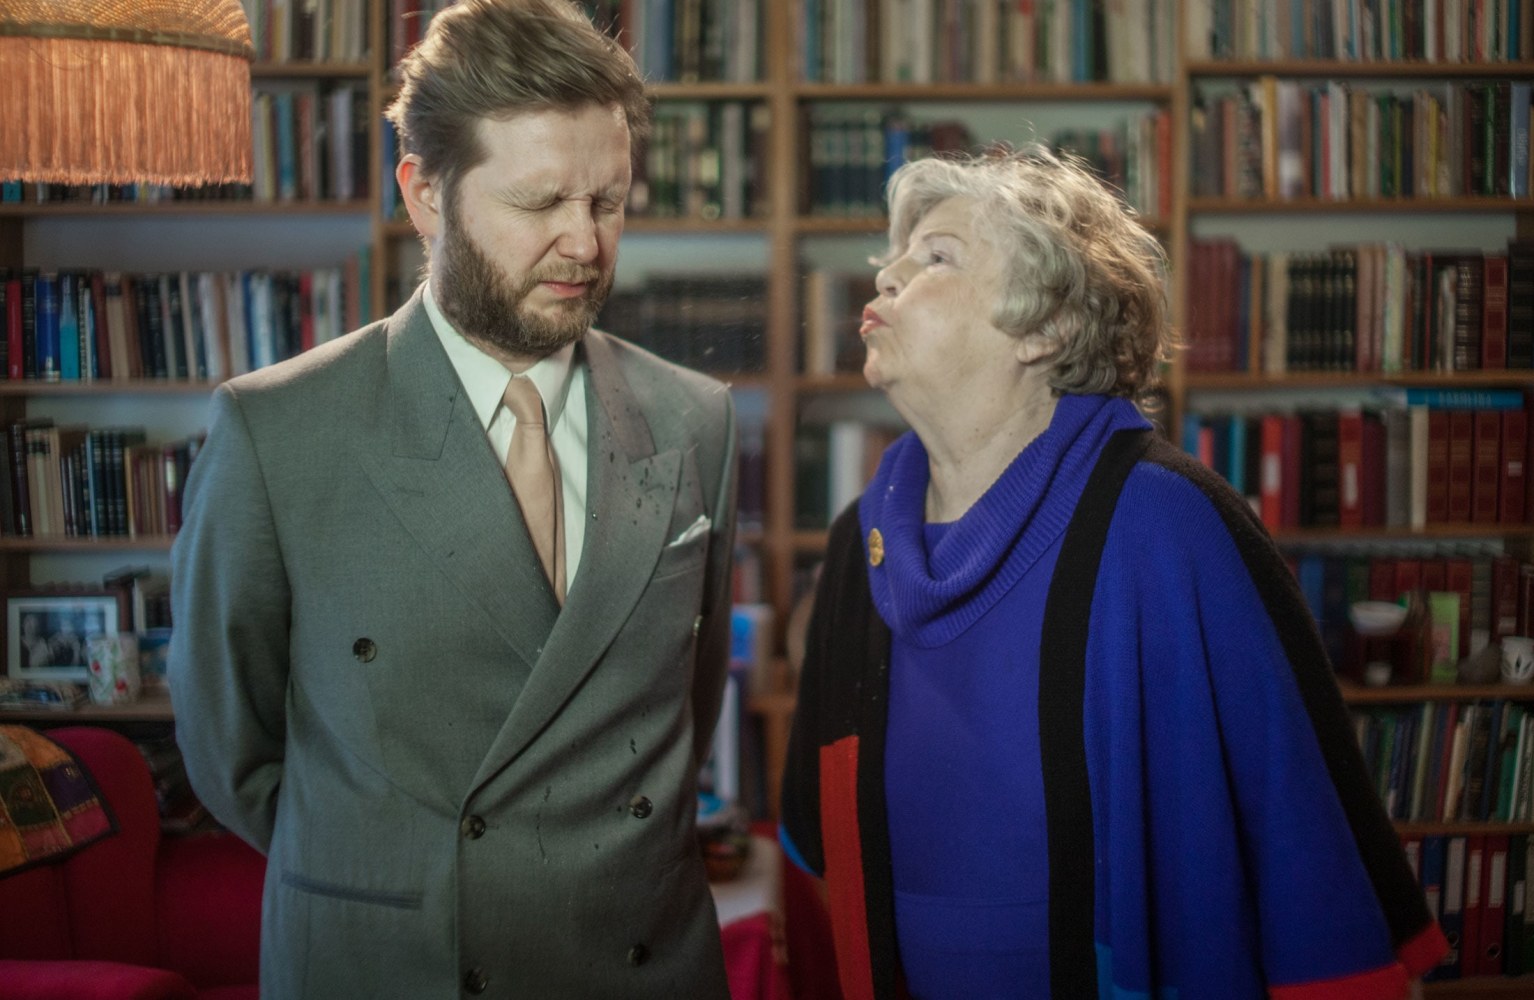 Ragnar Kjartansson
Me and My Mother 2015, 2015
Single-channel video with sound
Duration: 20 minutes, 25 seconds